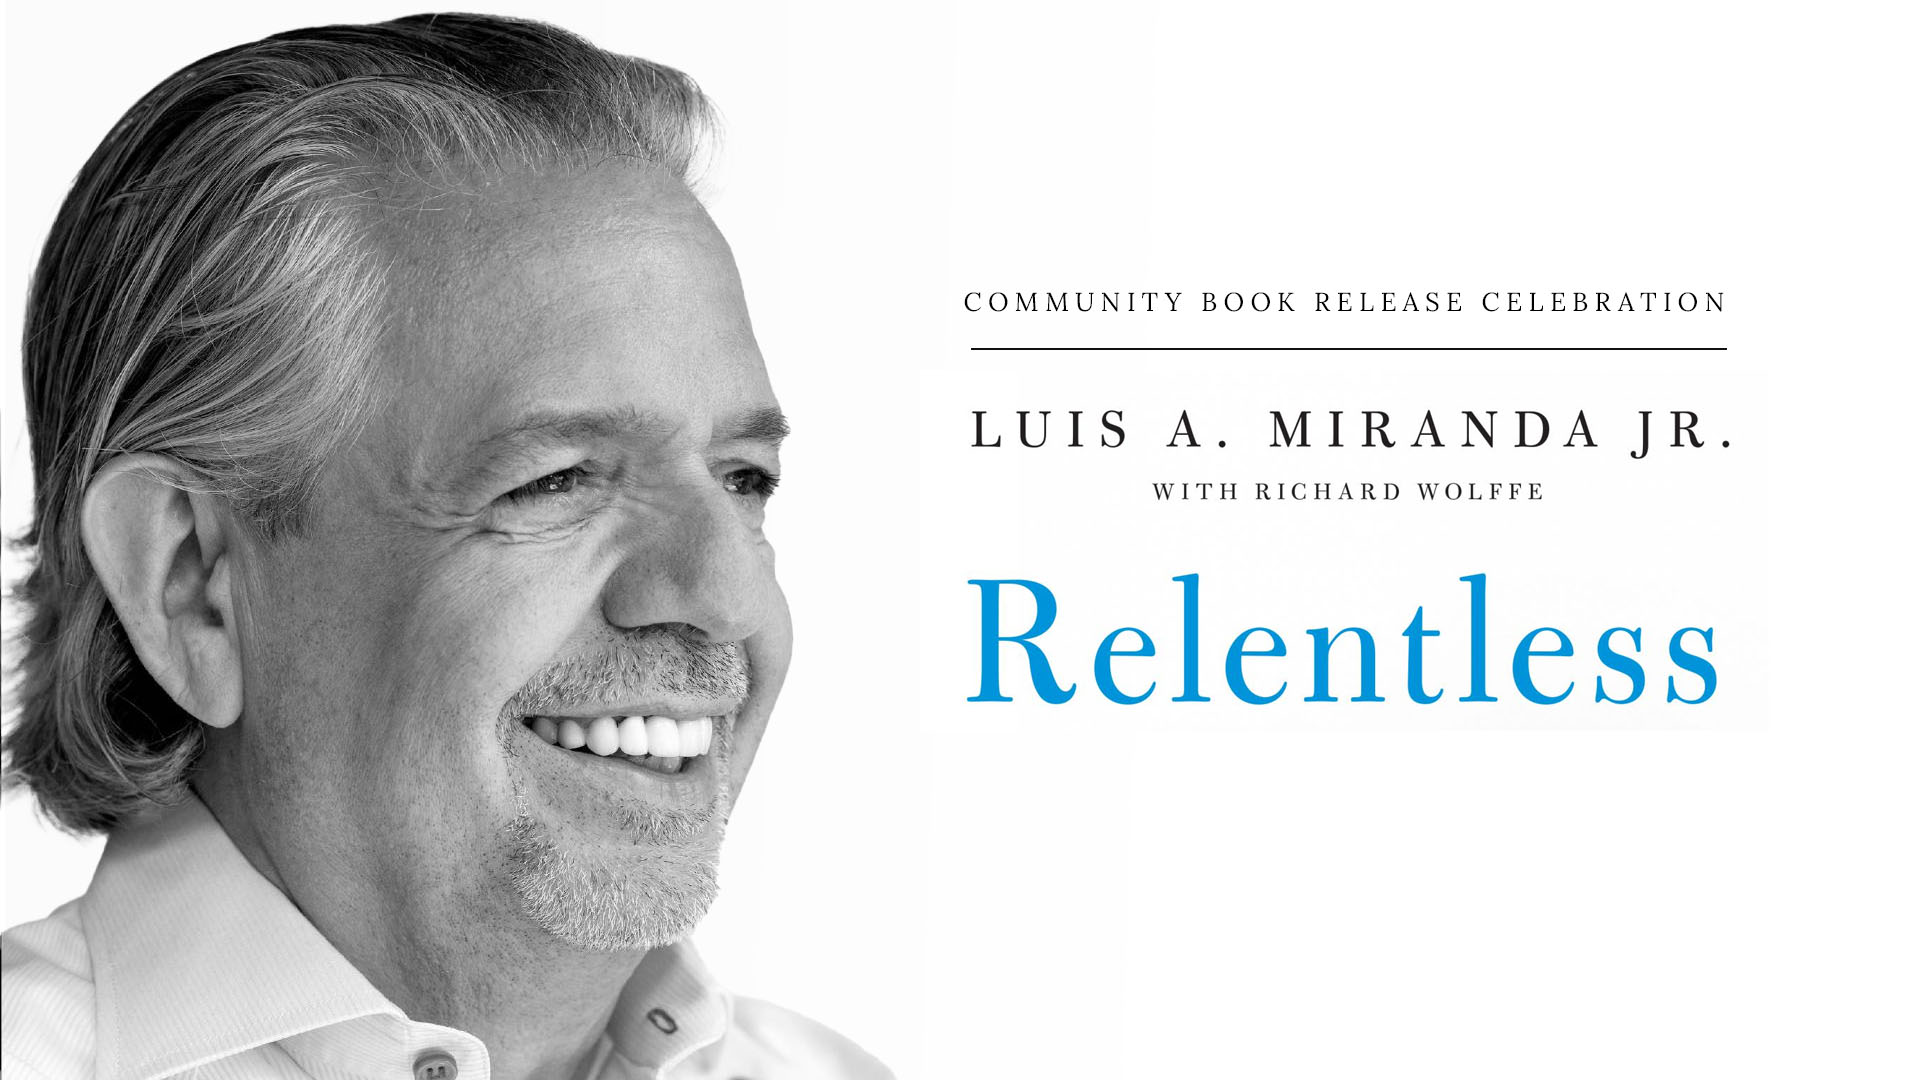 RELENTLESS: My Story of the Latino Spirit That Is Transforming America